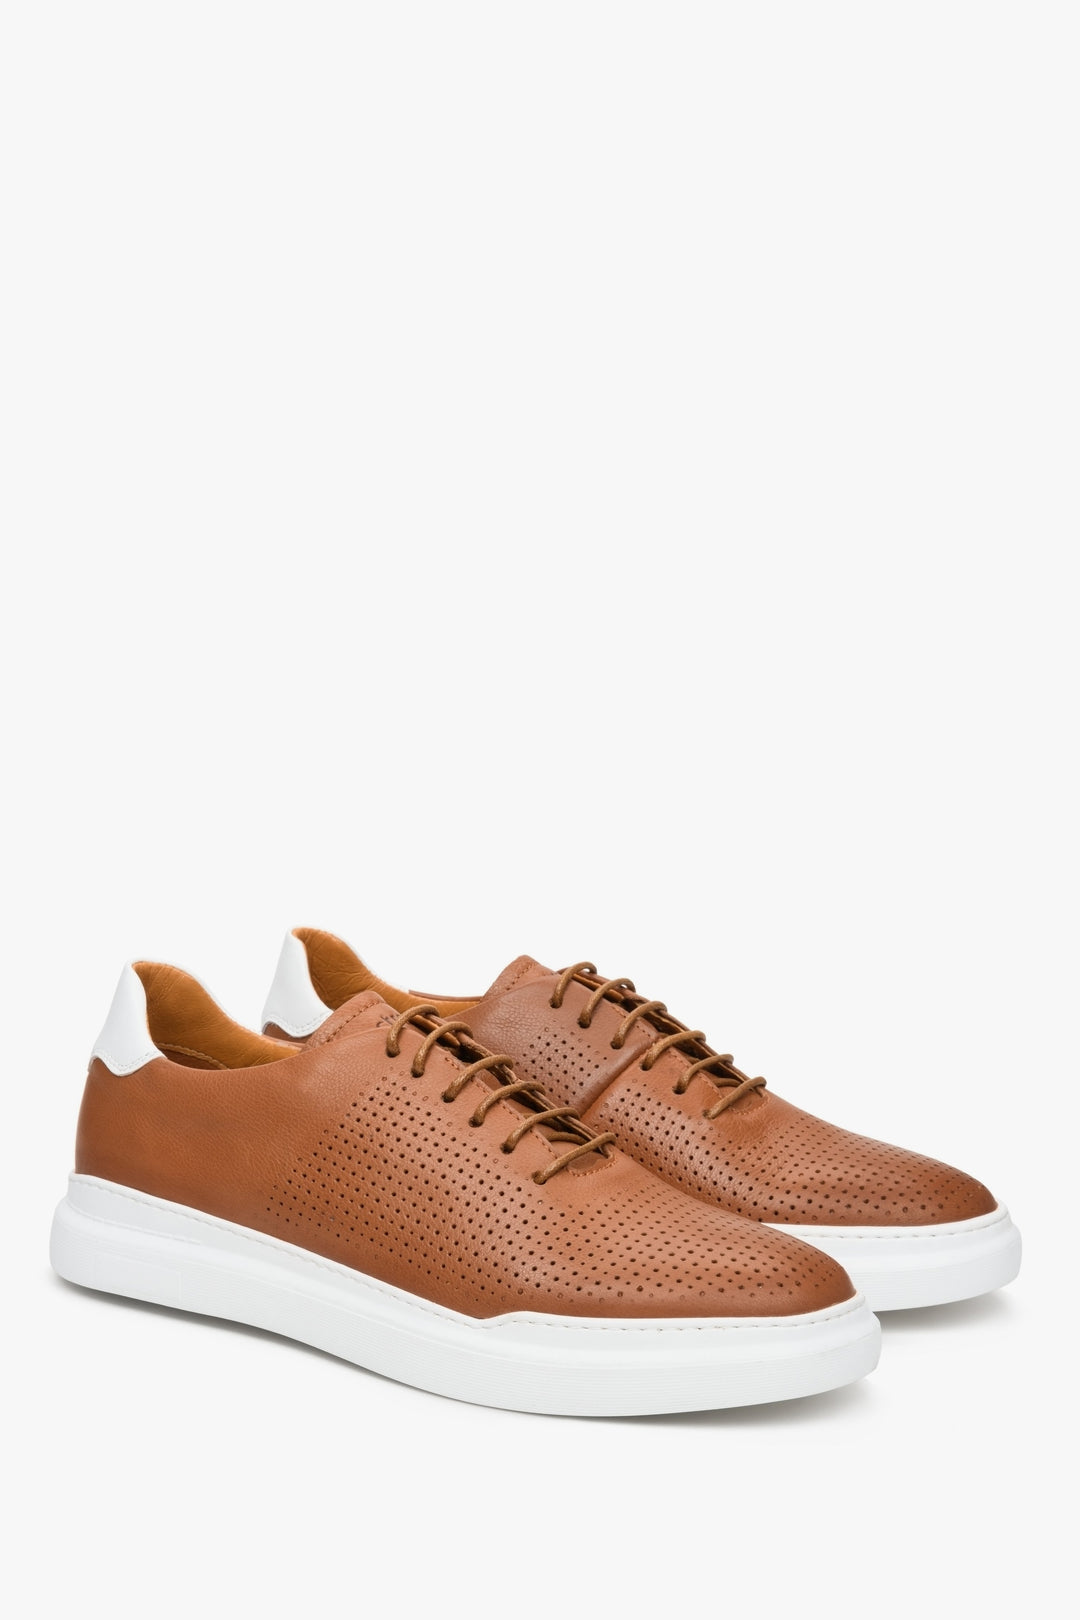 Brown men's natural leather Estro sneakers for summer - presentation of the top of the shoes and the side seam.